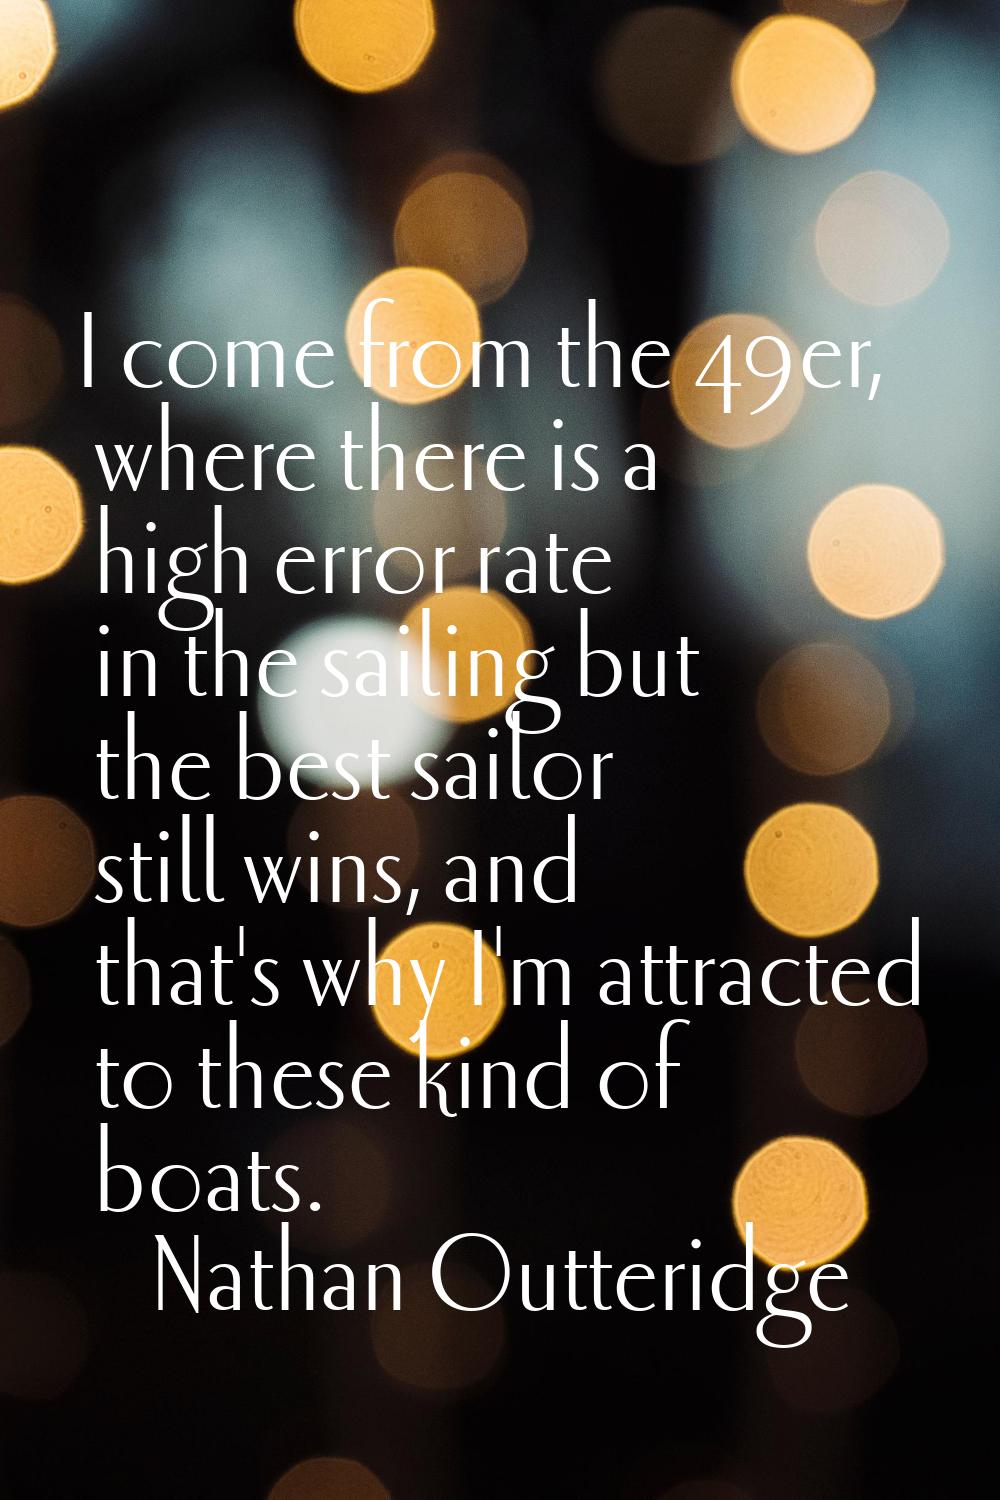 I come from the 49er, where there is a high error rate in the sailing but the best sailor still win